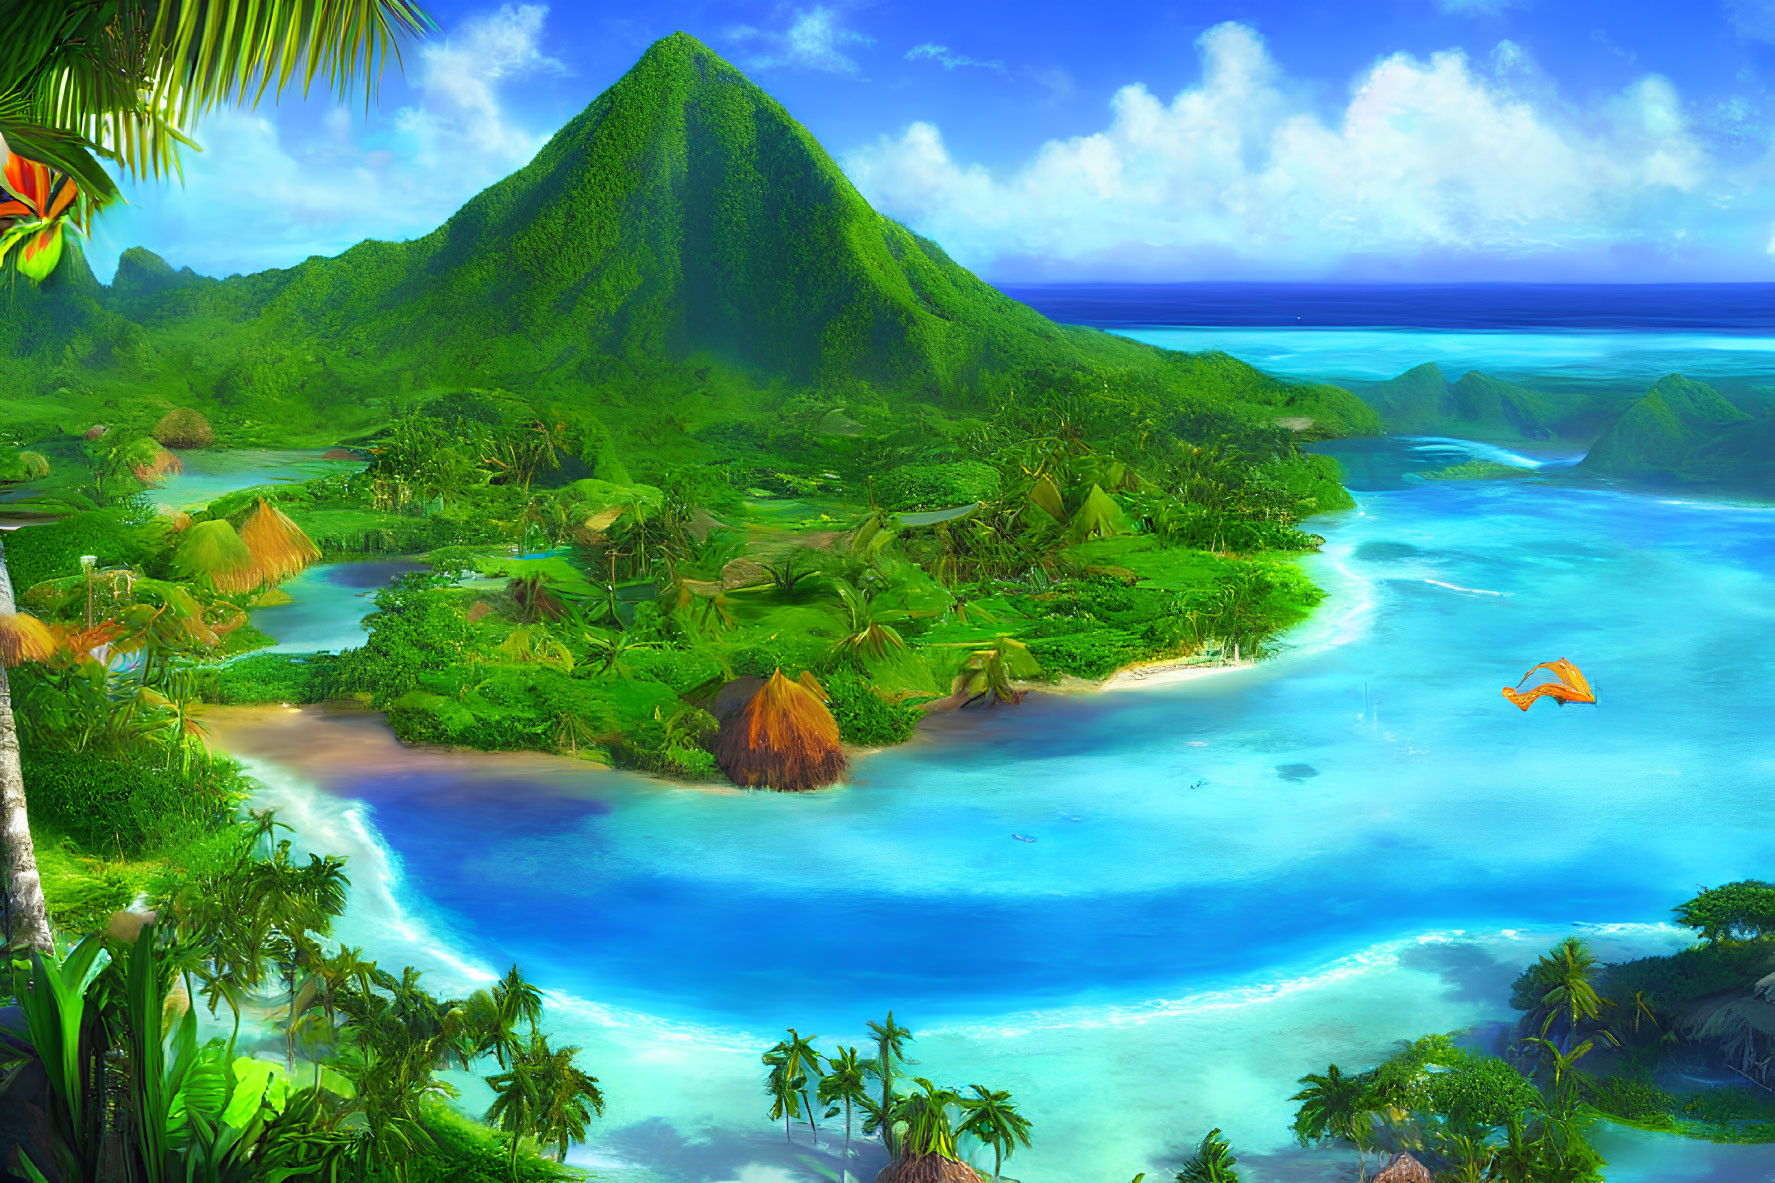 Tropical island with green mountain, palm trees, huts, blue lagoon, and parasailing